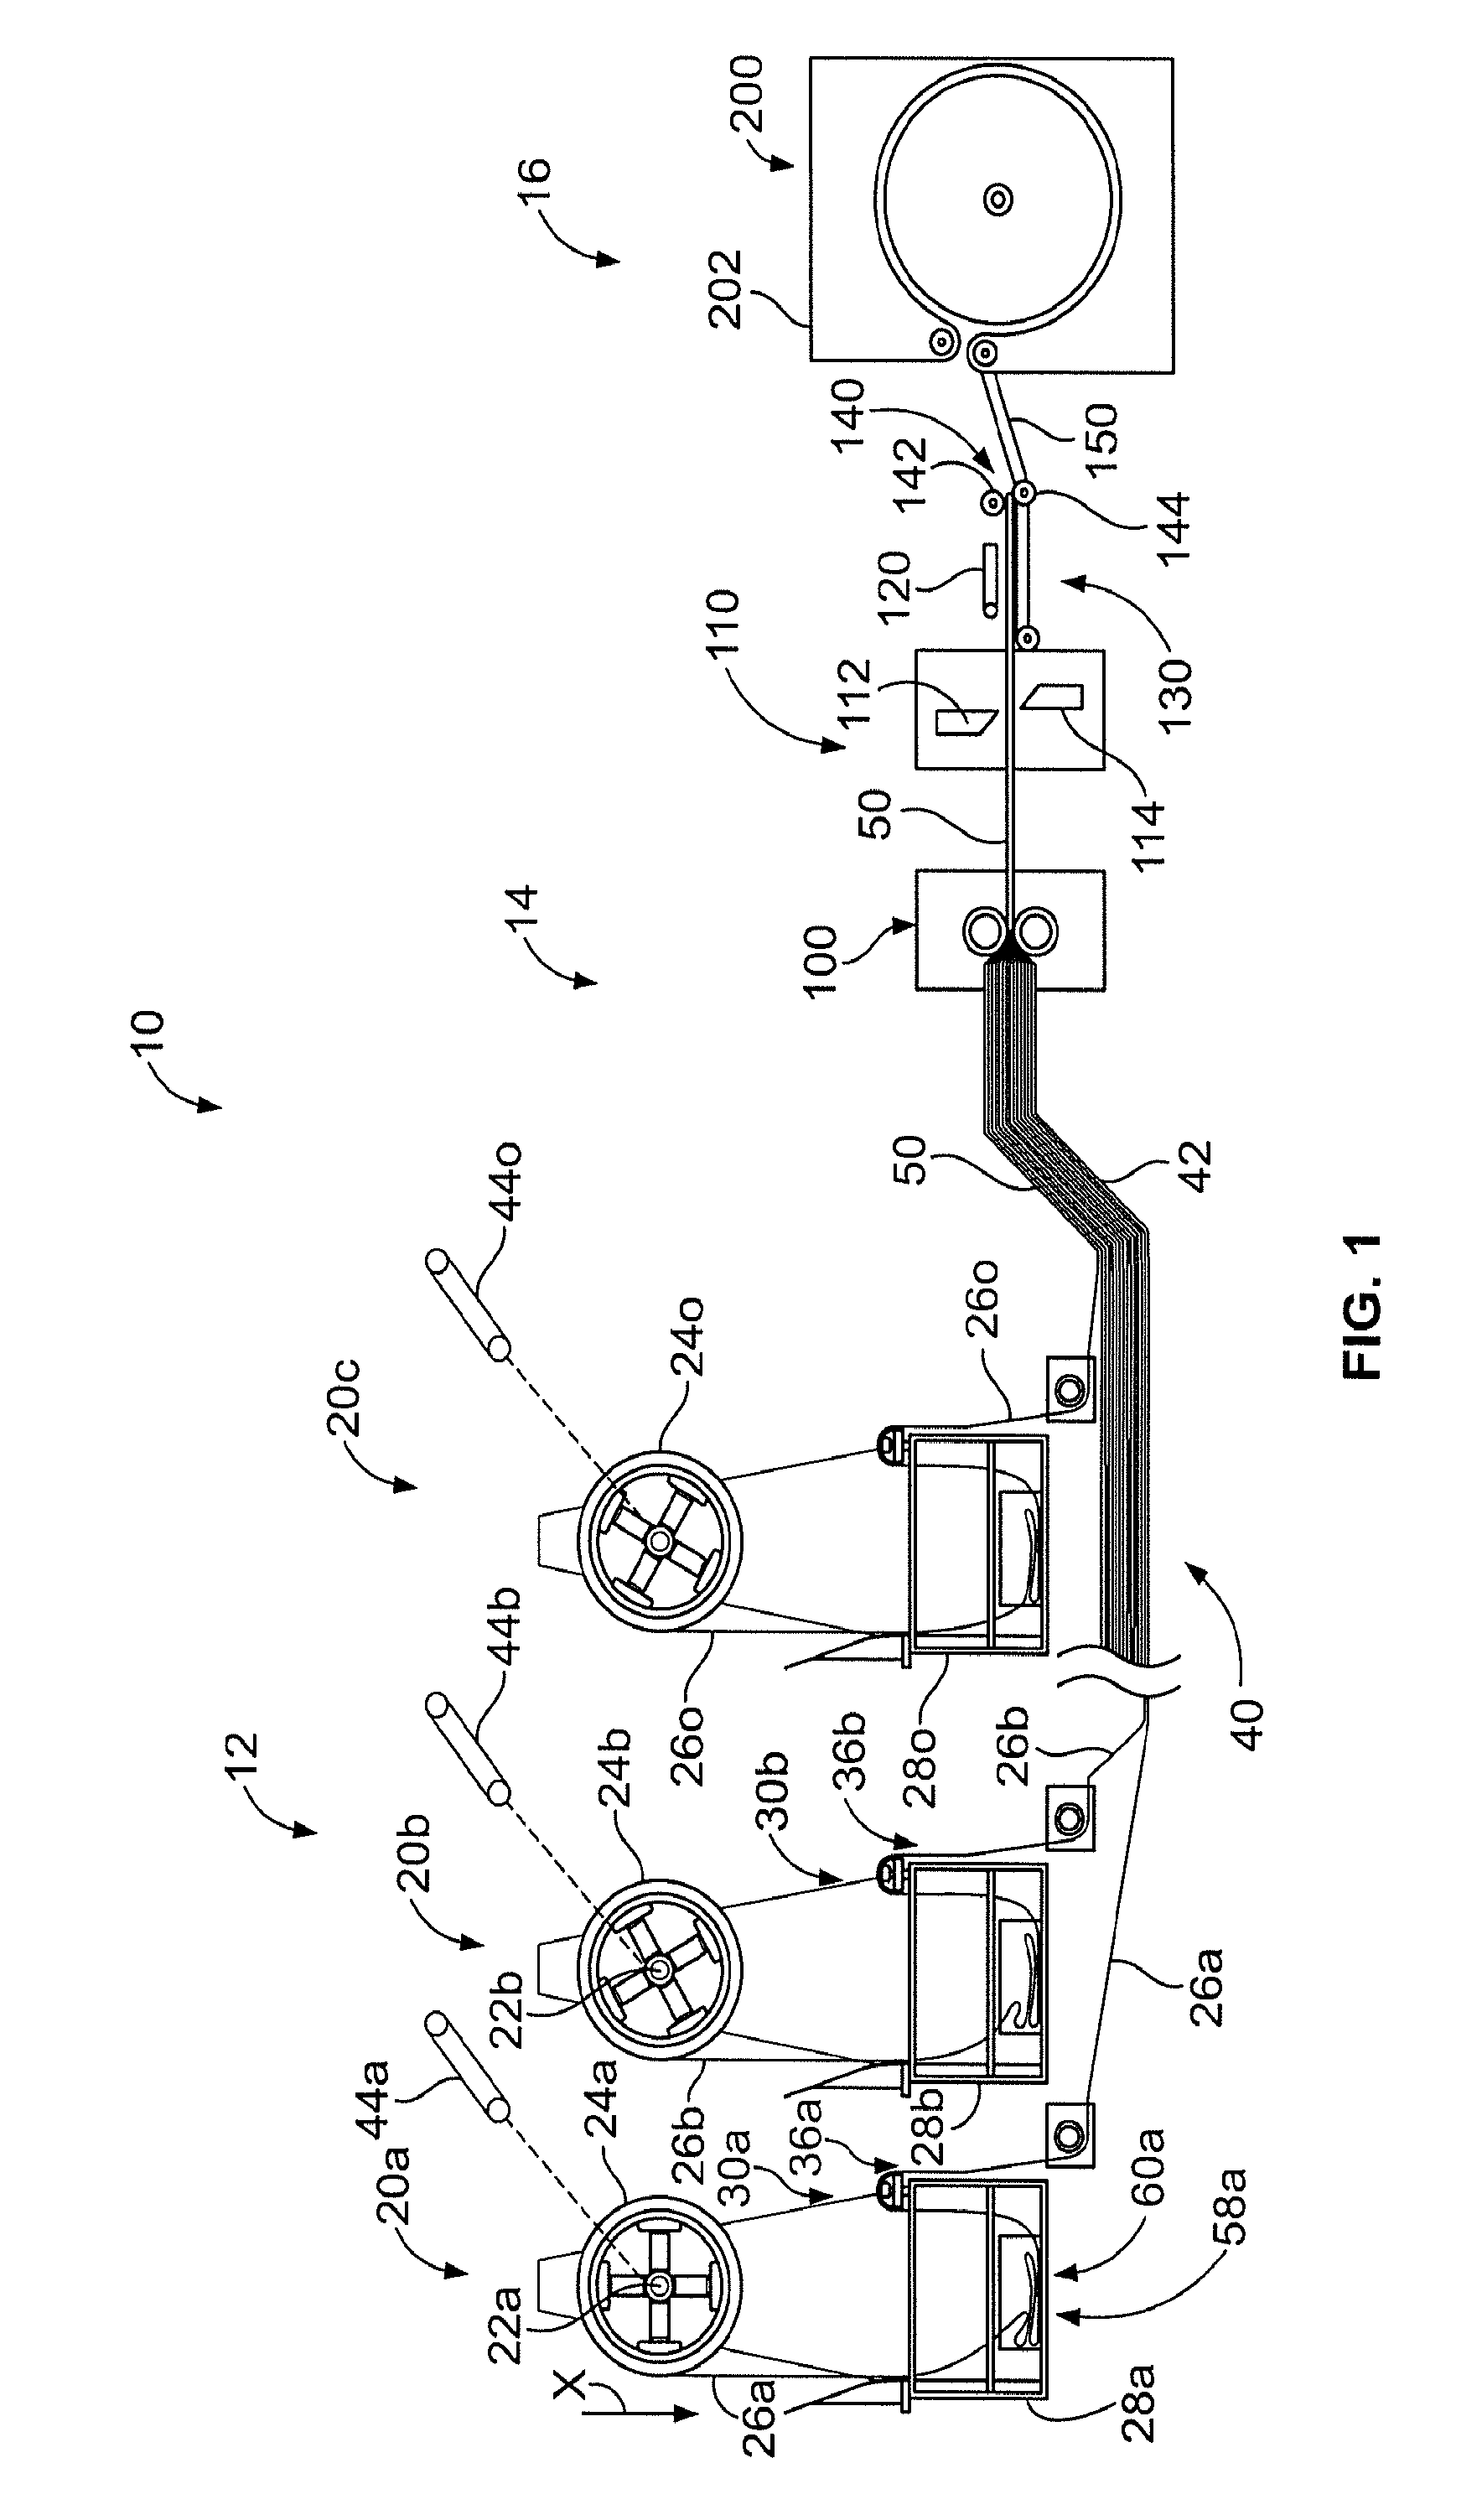 Method and apparatus for making amorphous metal transformer cores